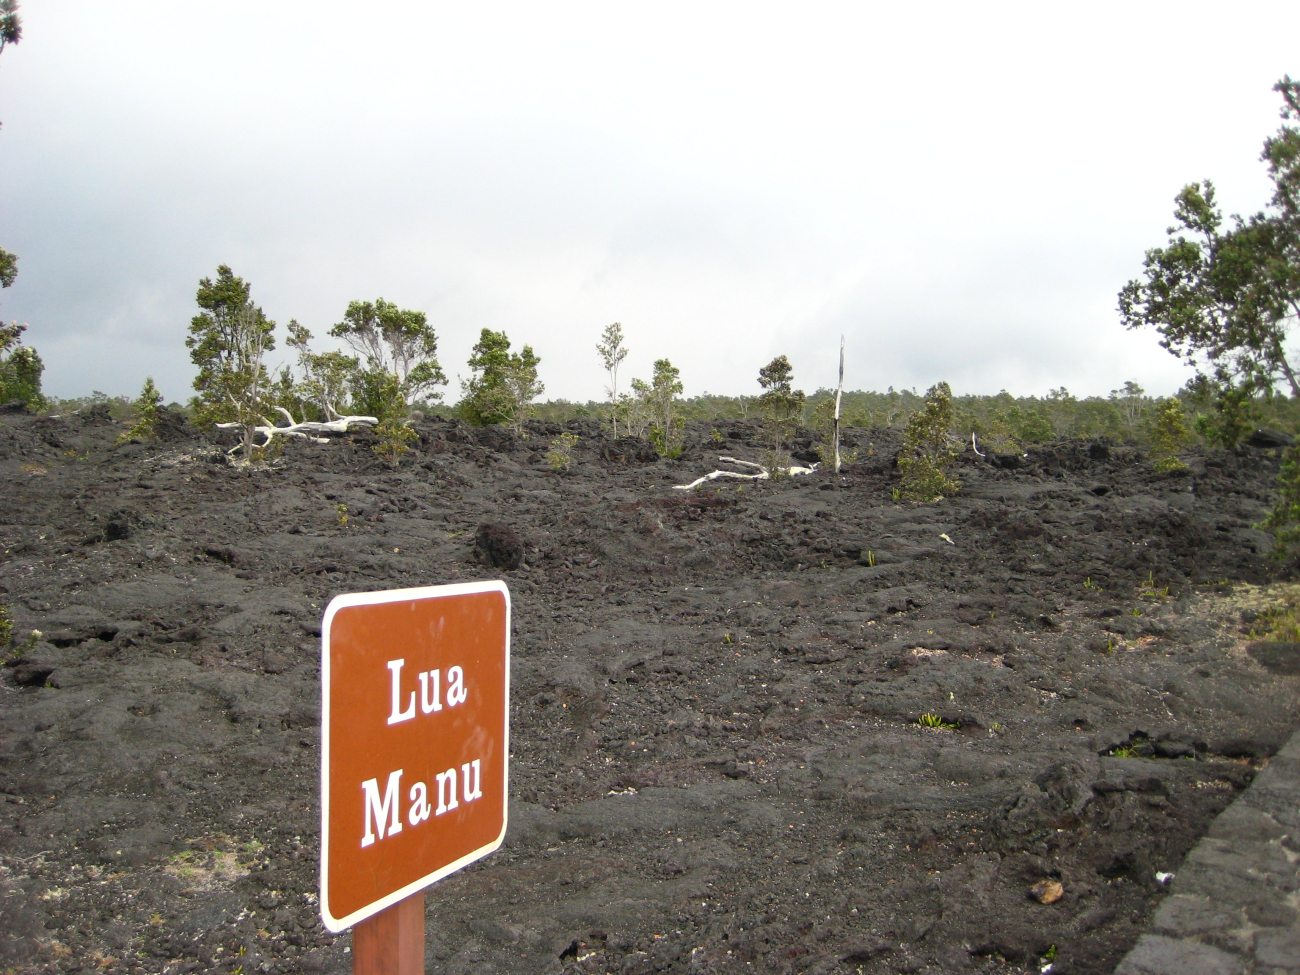 The Lua Manu Crater along the Chain of Craters scenic drive